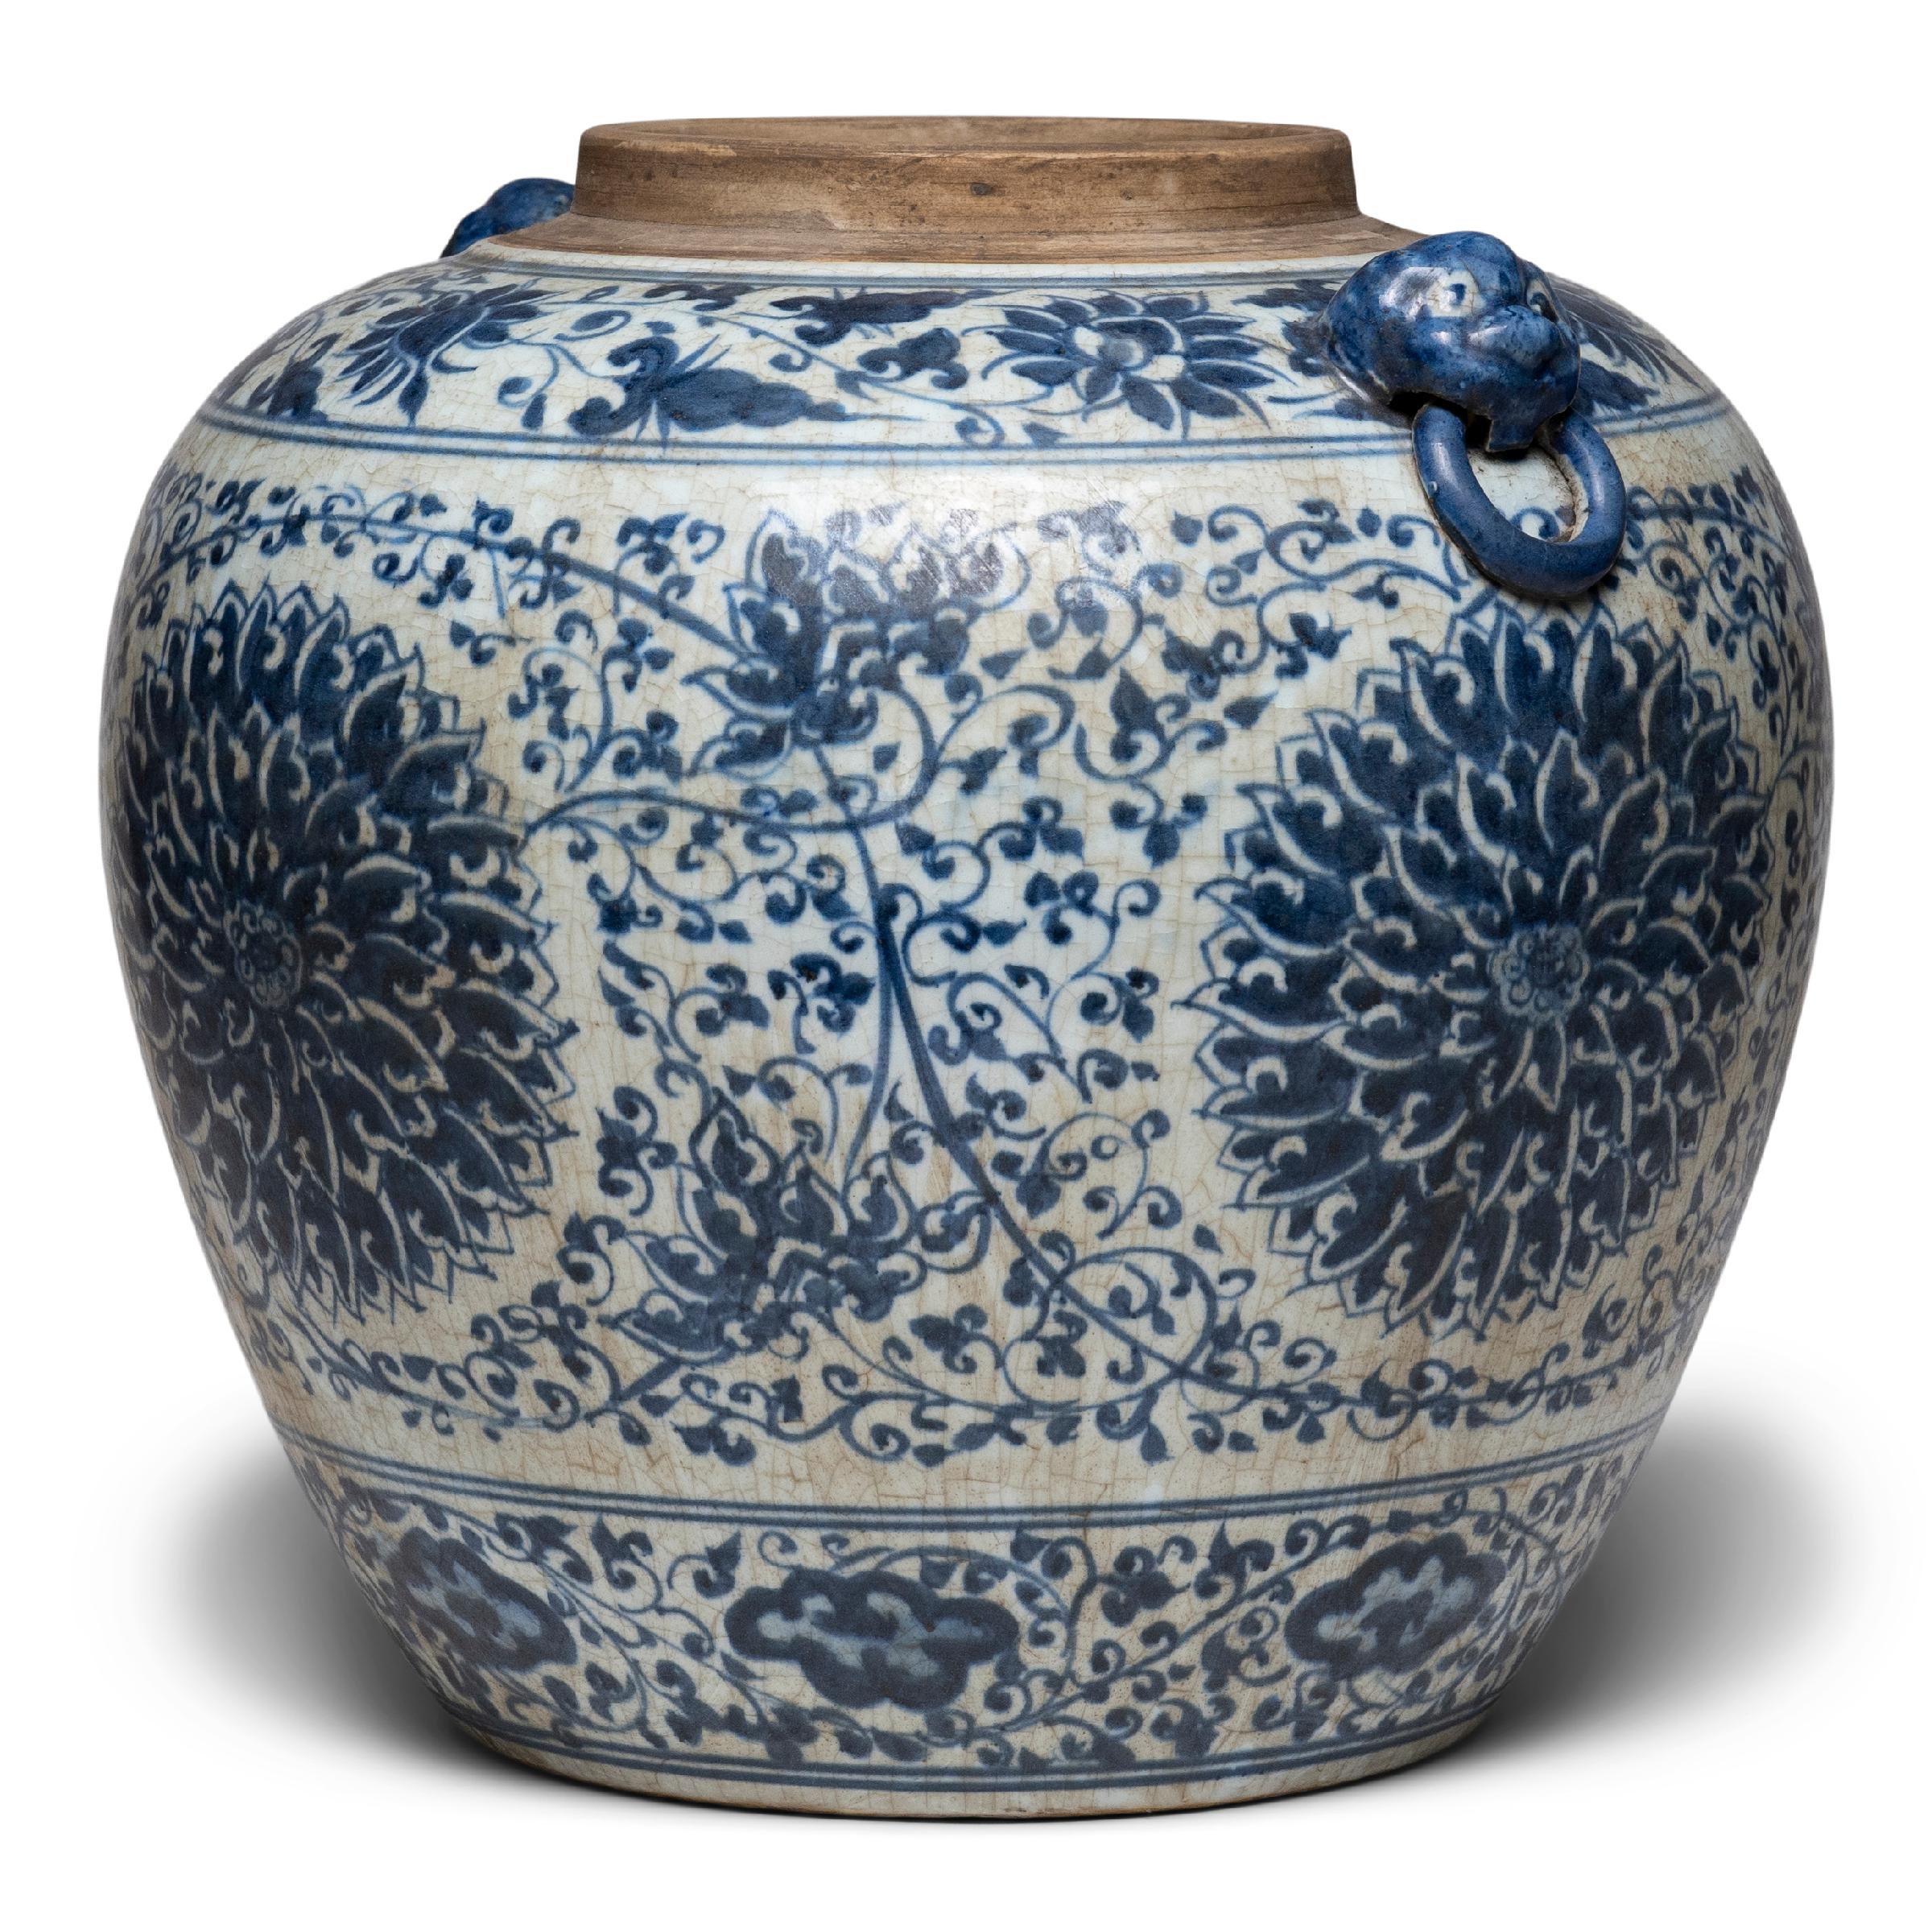 This large, tapered ginger jar continues a centuries-old tradition of Chinese blue-and-white porcelain ware. Painted with expressive brushwork, the jar is festooned with trailing vines and flower blossoms, densely patterned around large